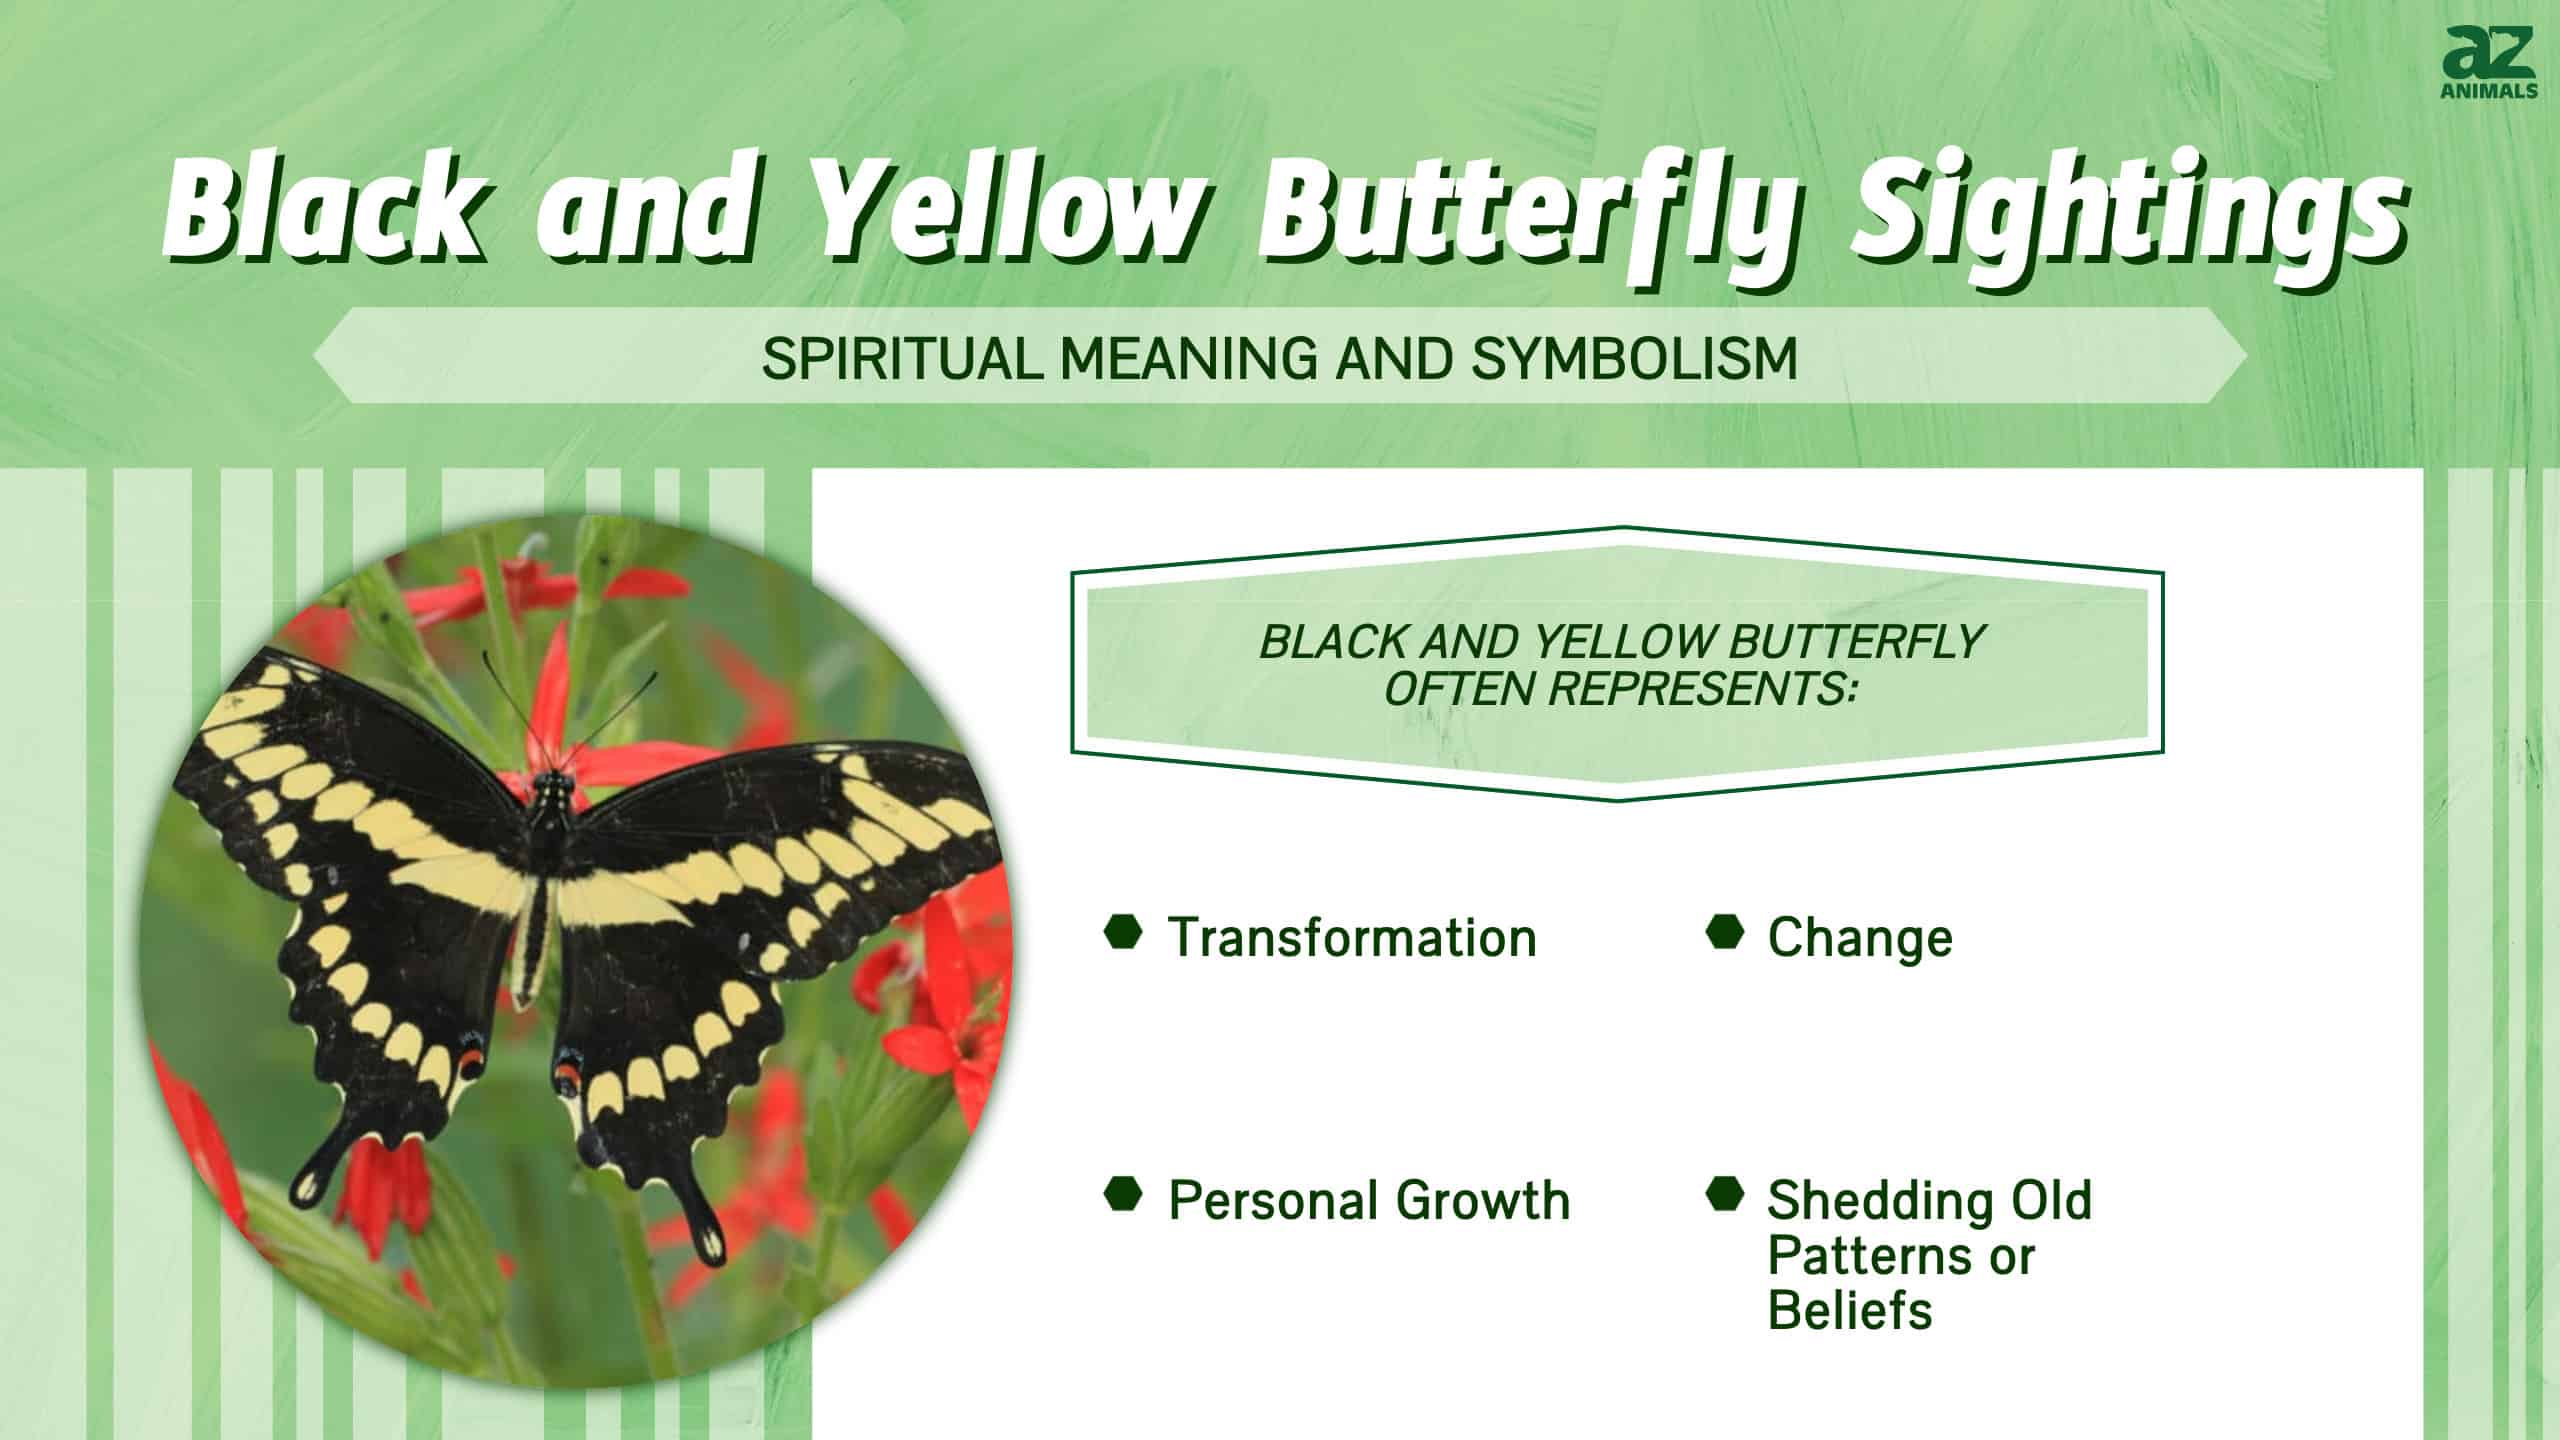 Black and Yellow Butterfly Sightings infographic